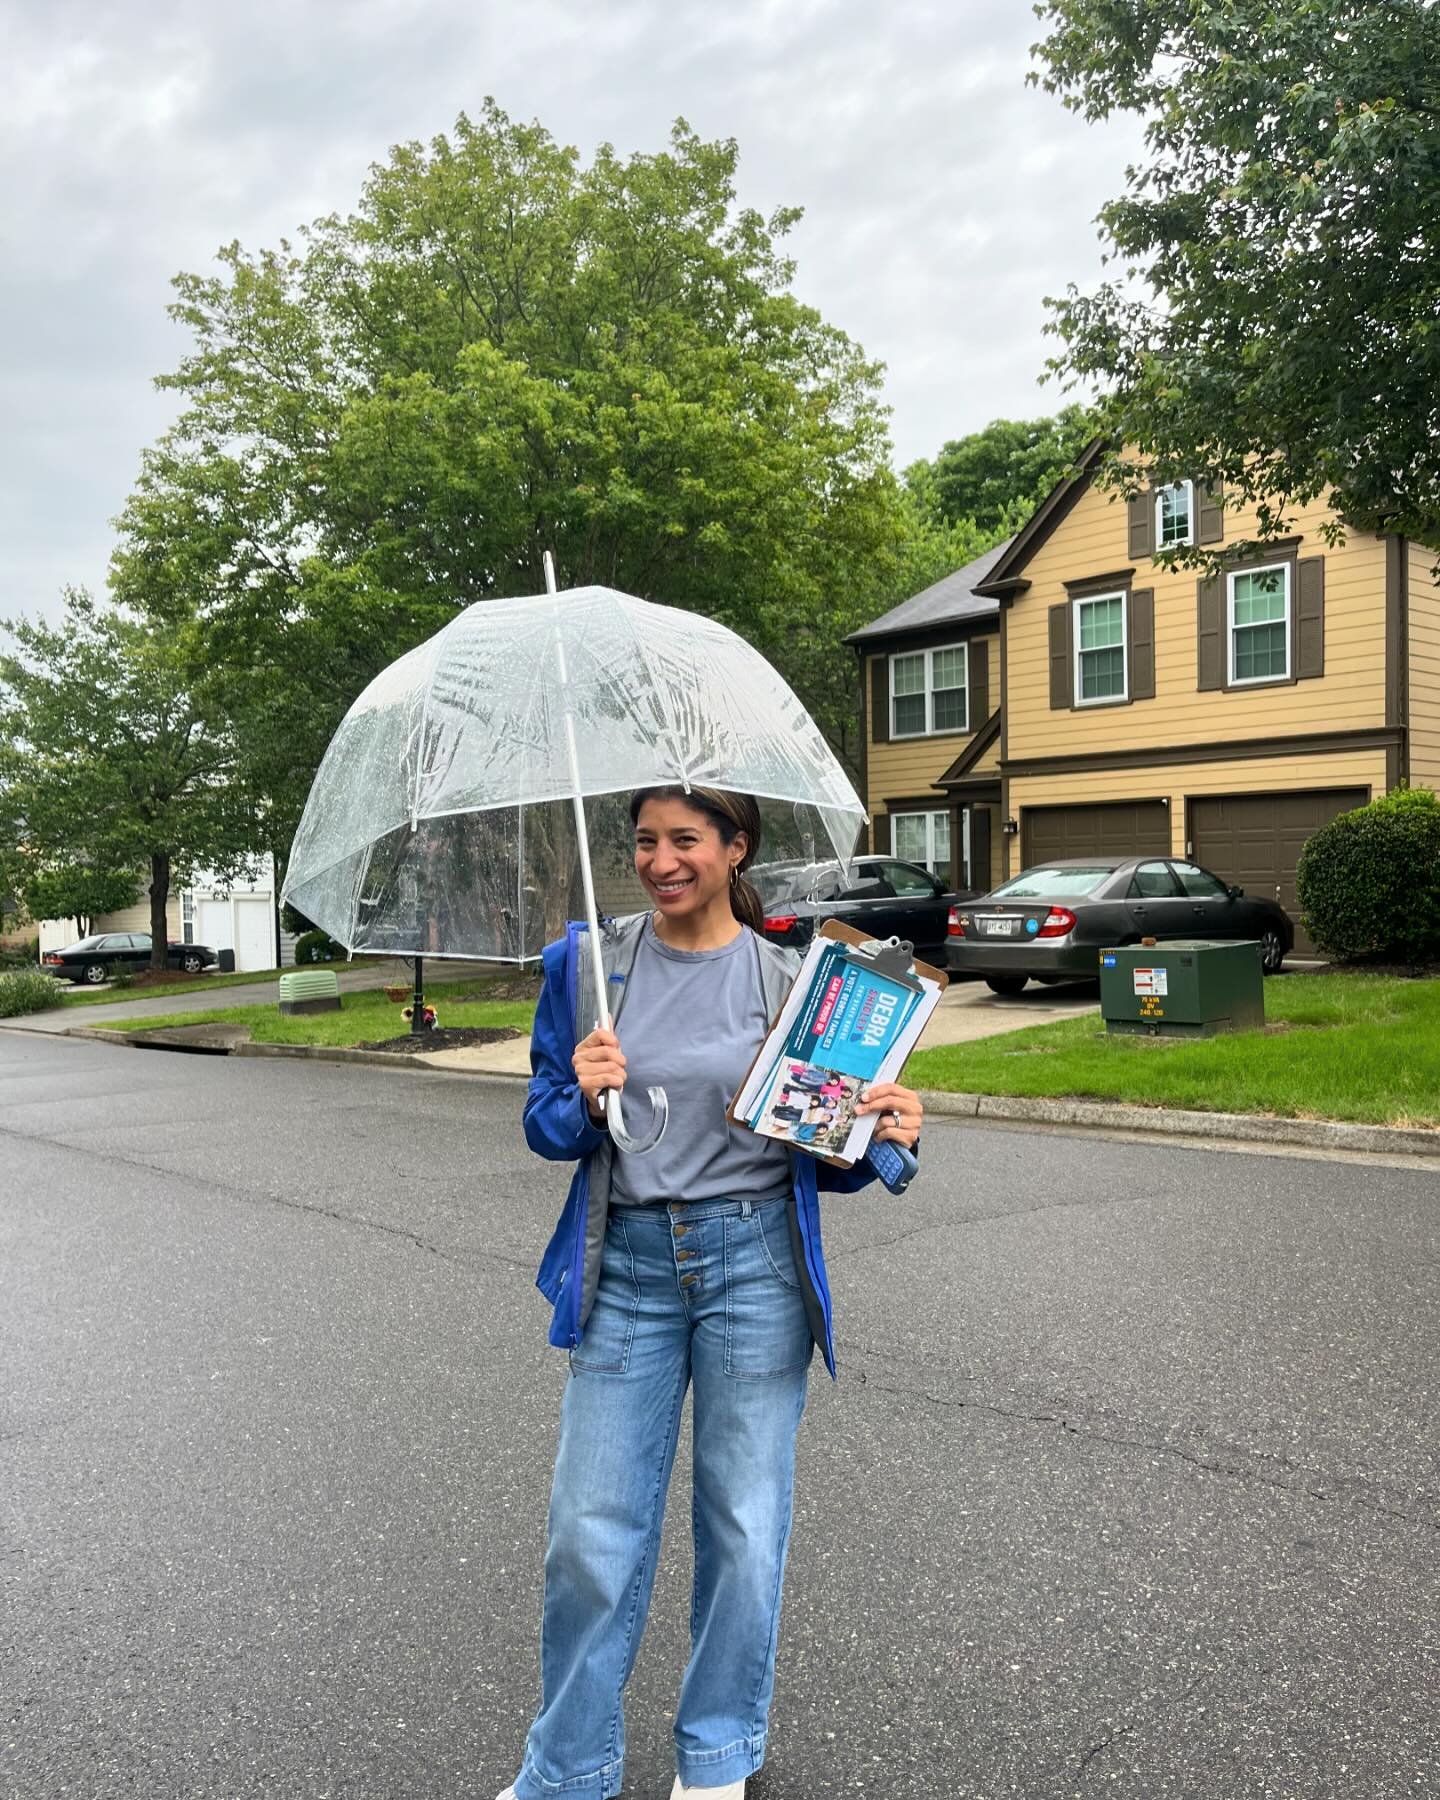 It&rsquo;s a great day to canvass, rain or shine! ☔️ I truly love knocking doors. It&rsquo;s a great way to get to know members of our community and their top issues this election cycle. 

If you&rsquo;d like to join us this week, sign up in the link